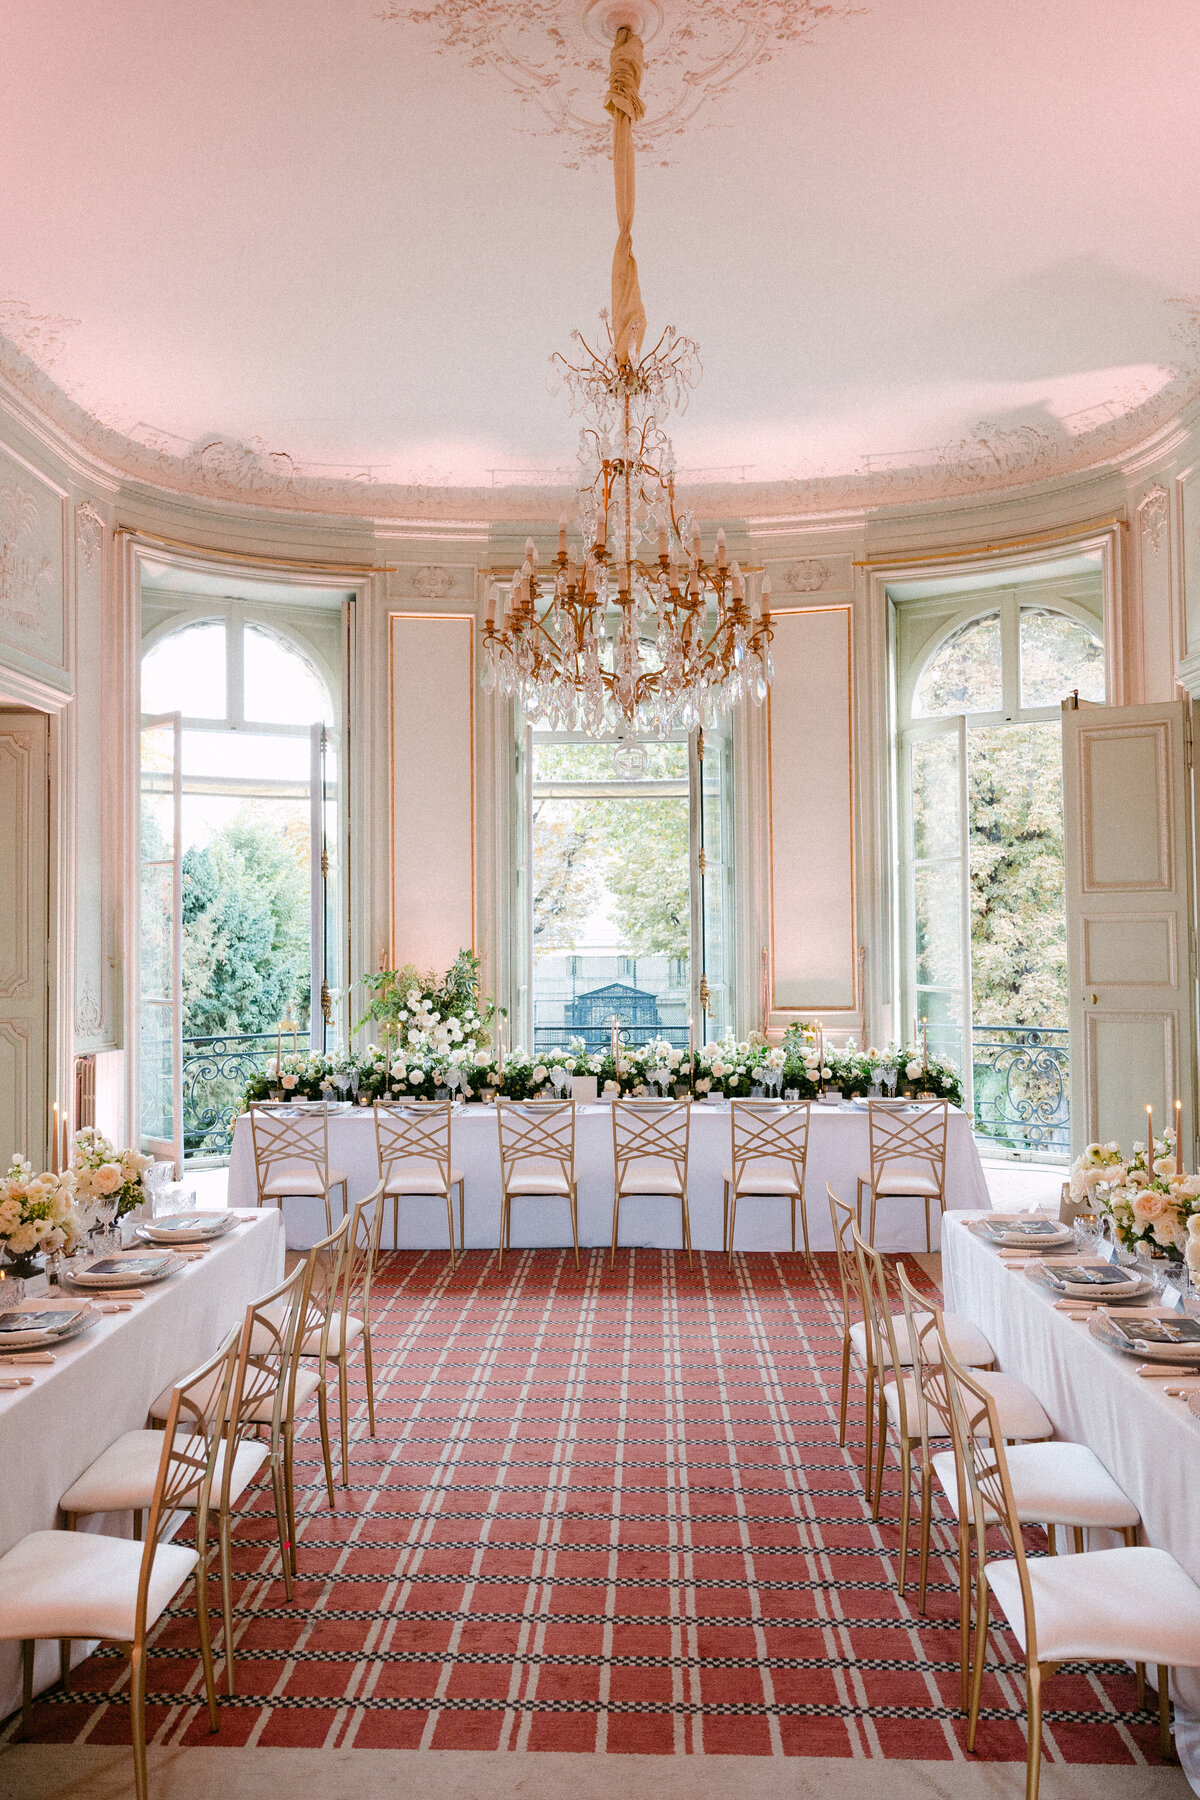 Jennifer Fox Weddings English speaking wedding planning & design agency in France crafting refined and bespoke weddings and celebrations Provence, Paris and destination wd784